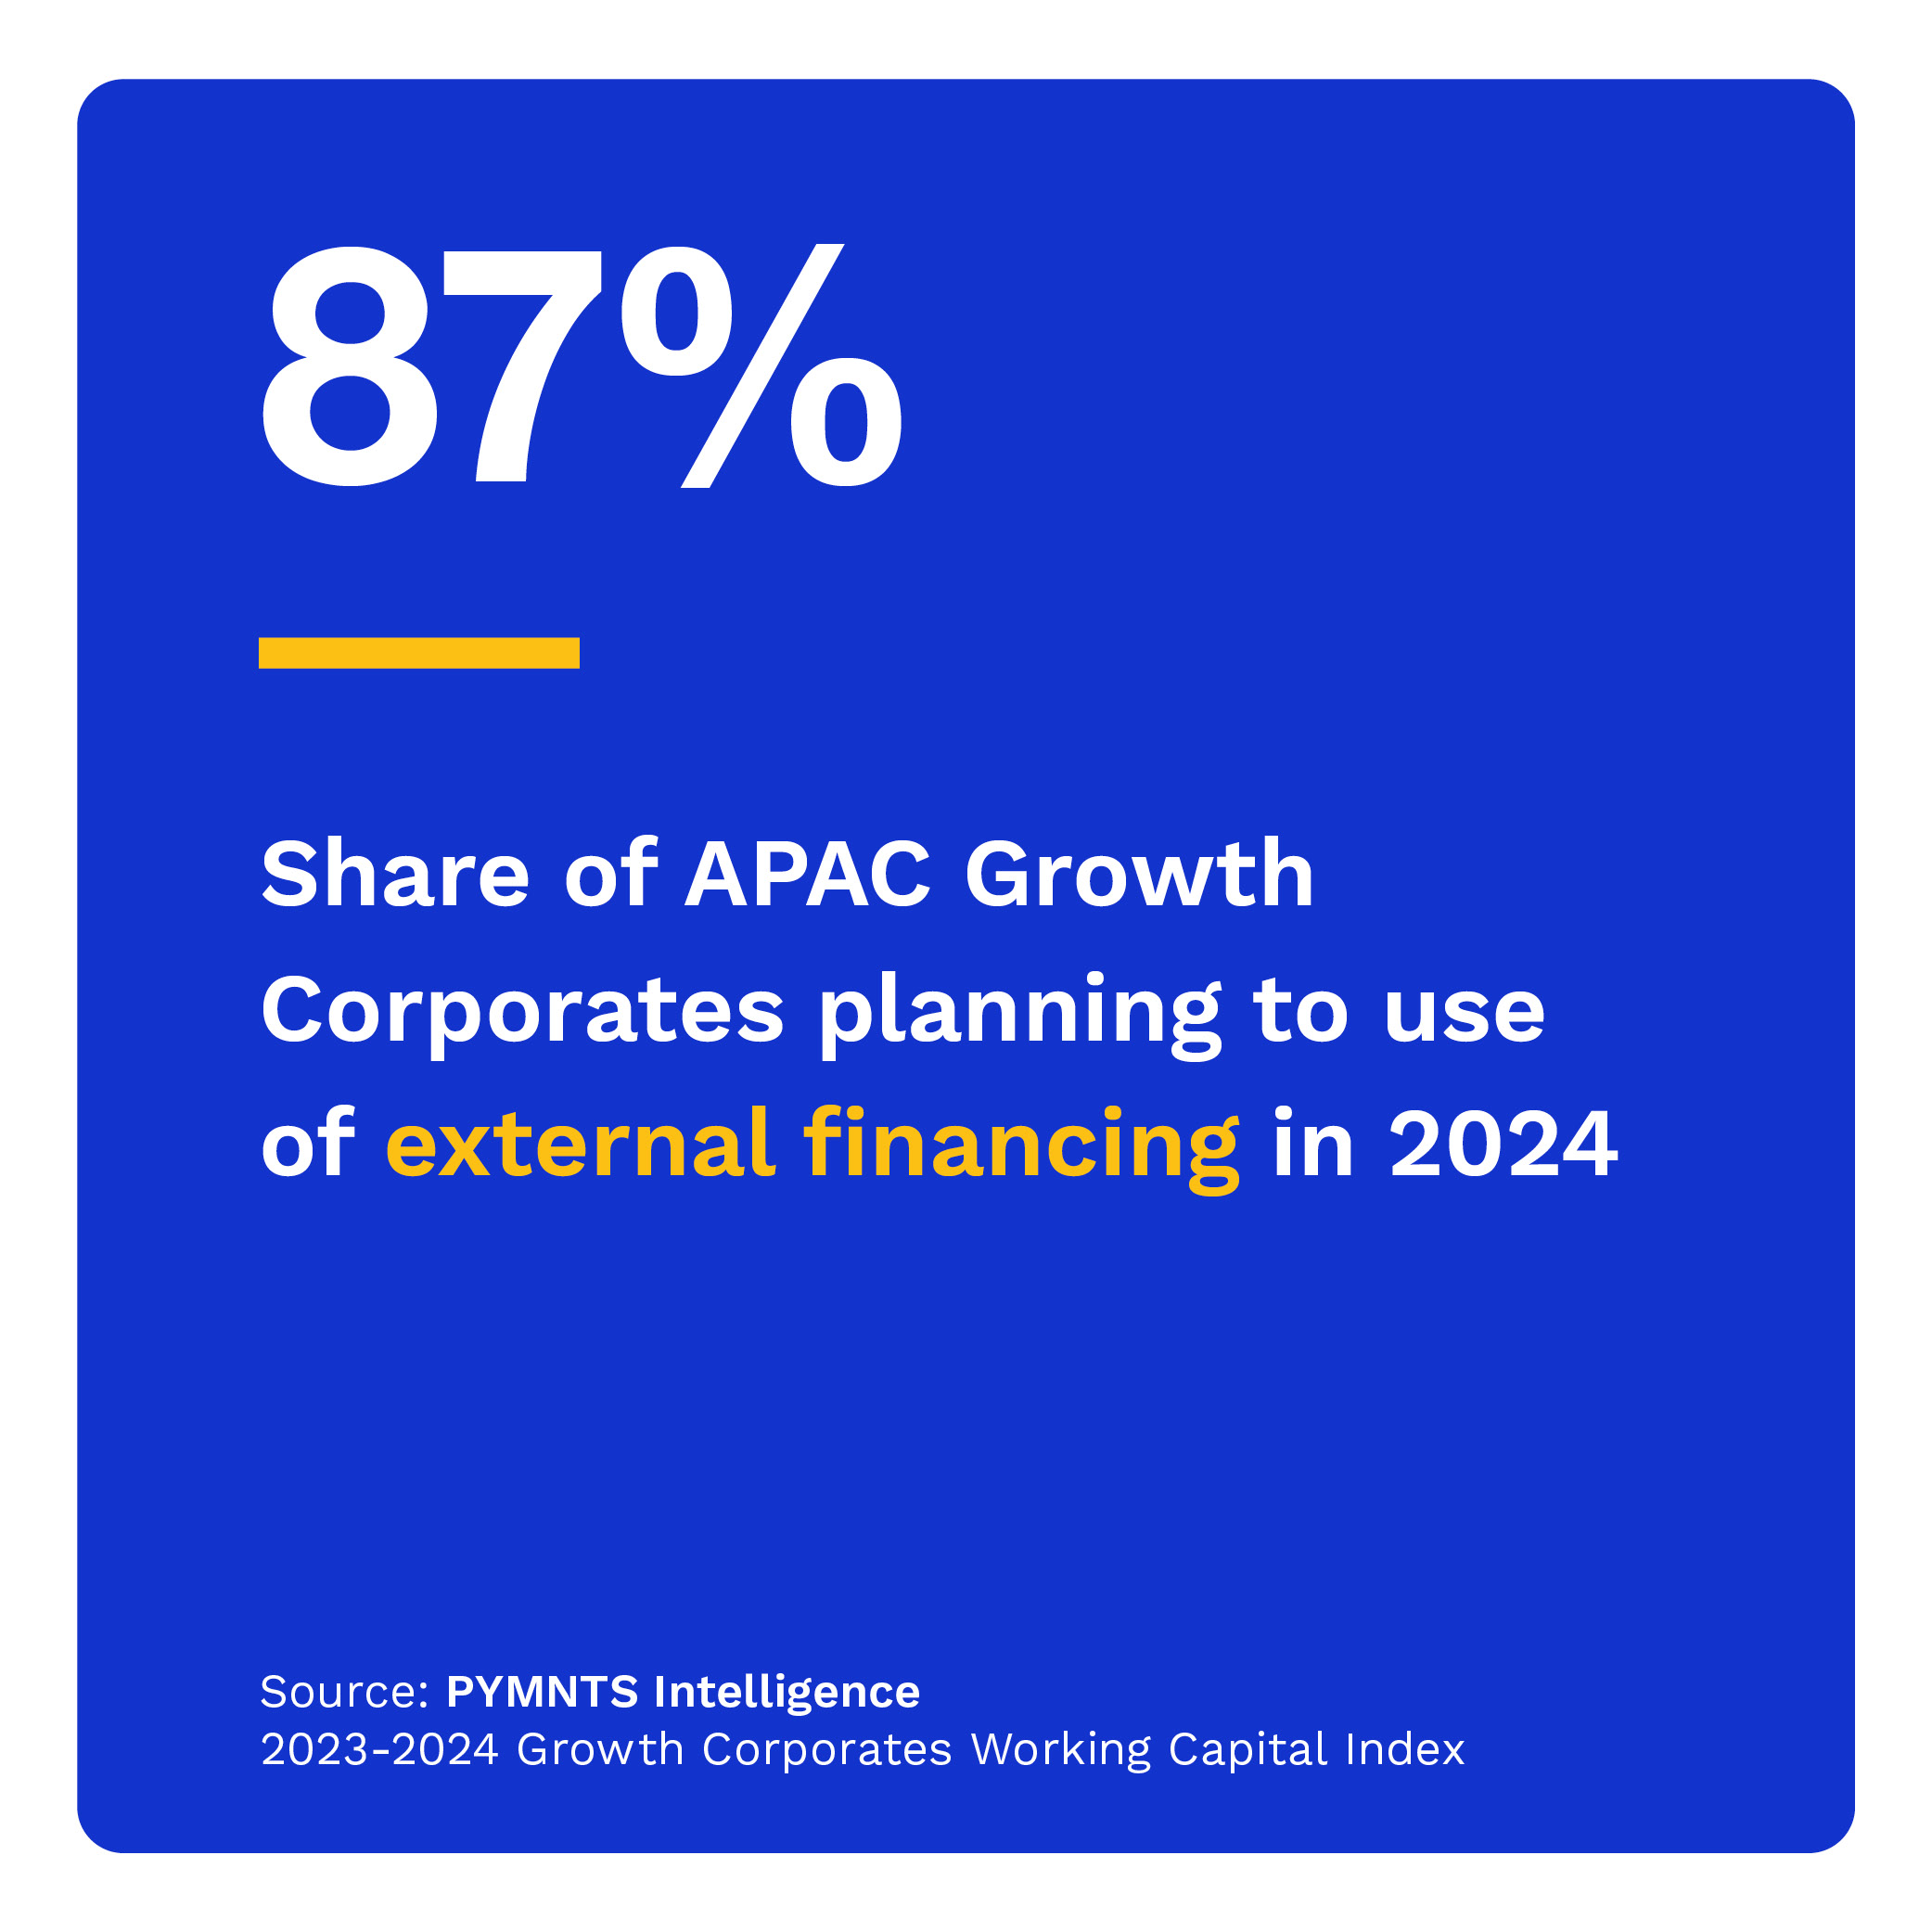 87%: Share of APAC Growth Corporates planning to use of external financing in 2024